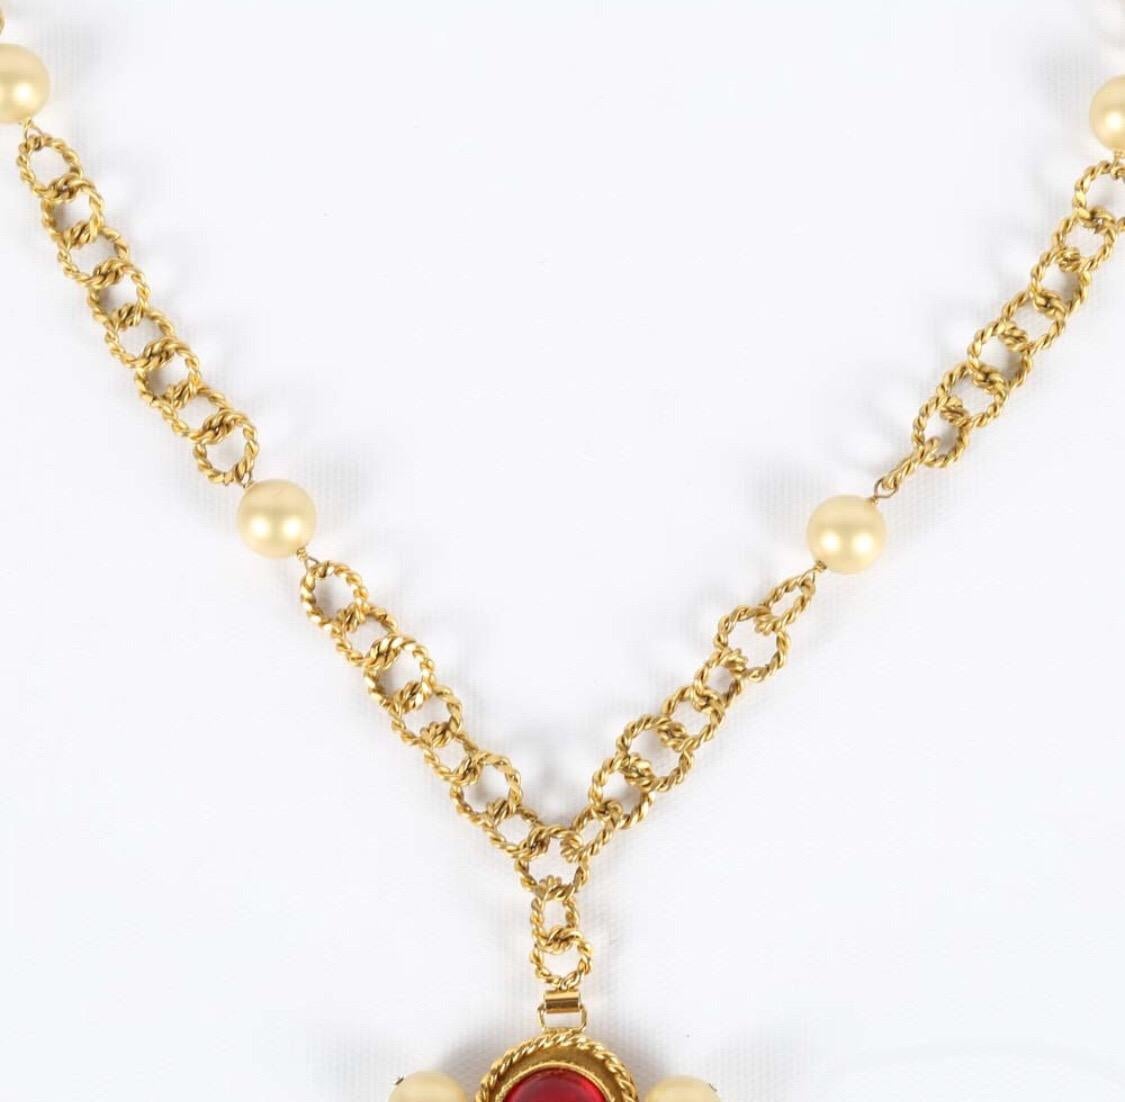 Women's or Men's Chanel Gripoix Pendent Necklace with Pearls, 1980s